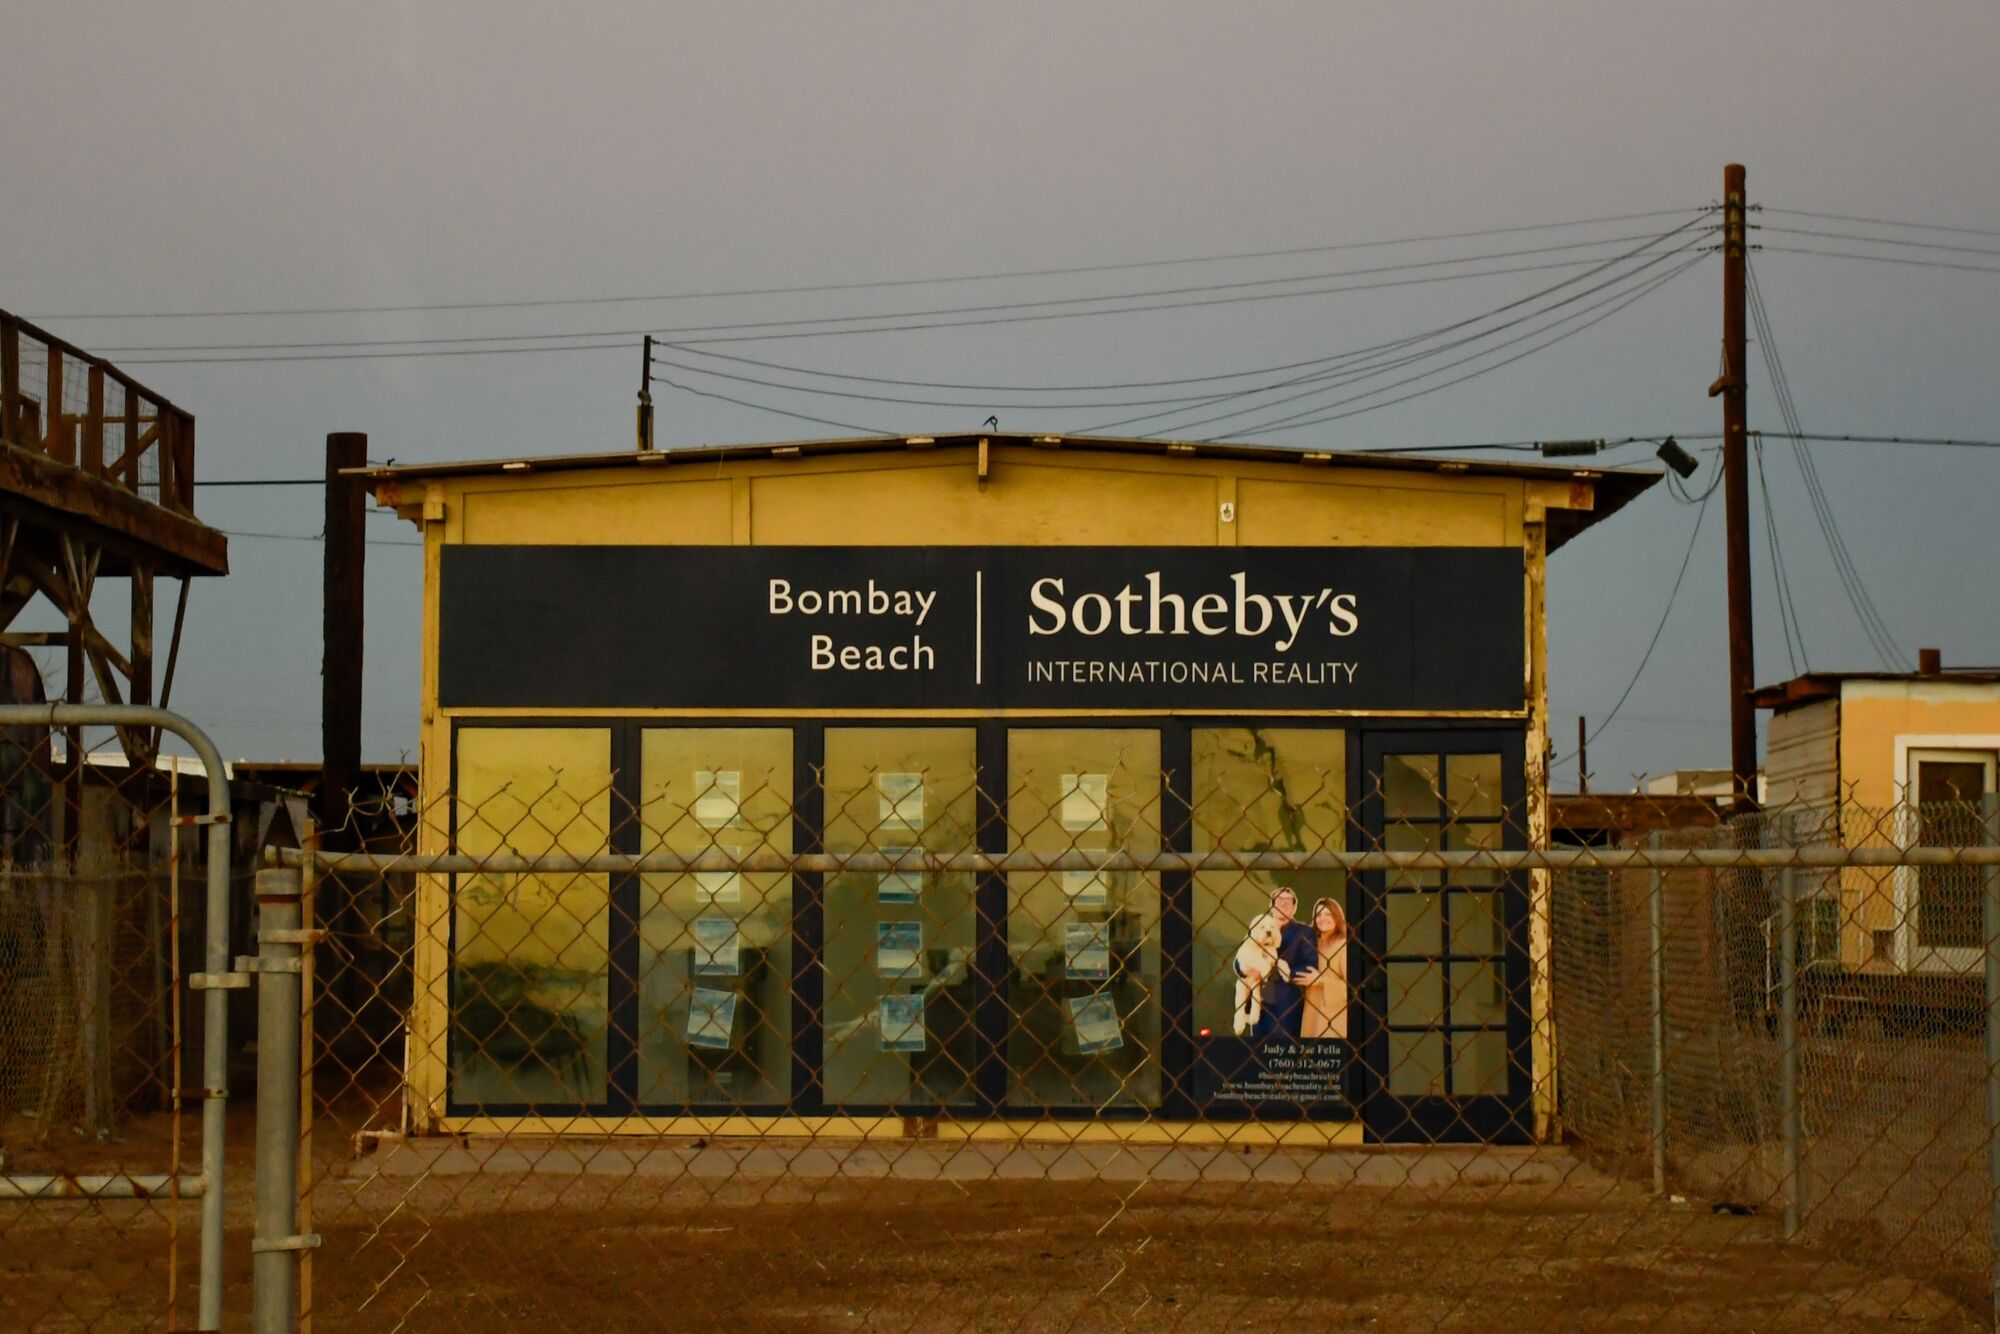 A building with a Sotheby's International Reality sign in Bombay Beach.